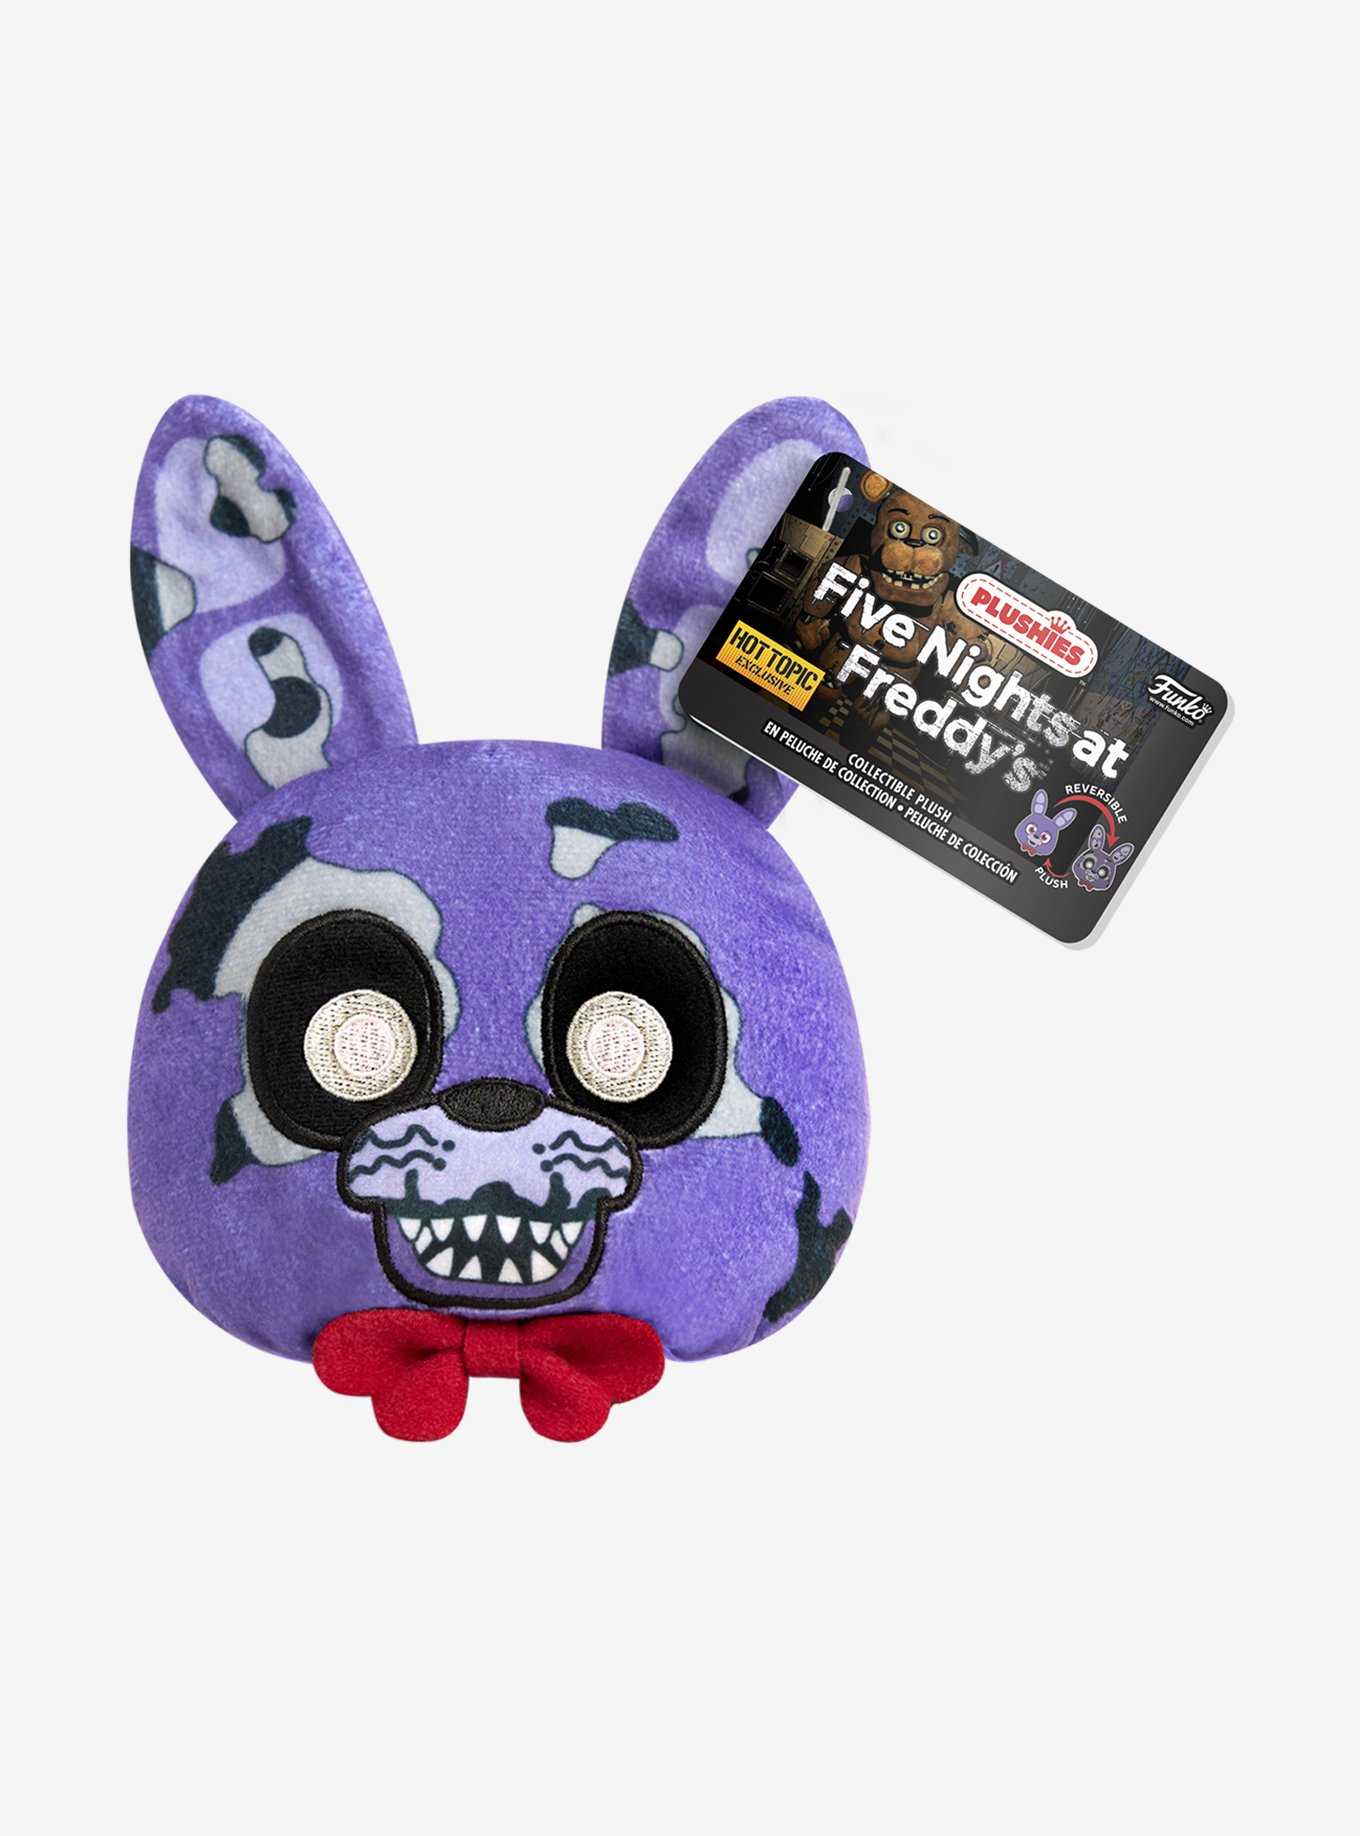 Figurine Mystery Minis Five Nights at Freddy's pas cher : FNAF Cirque et  Ballons - 12 Figurines